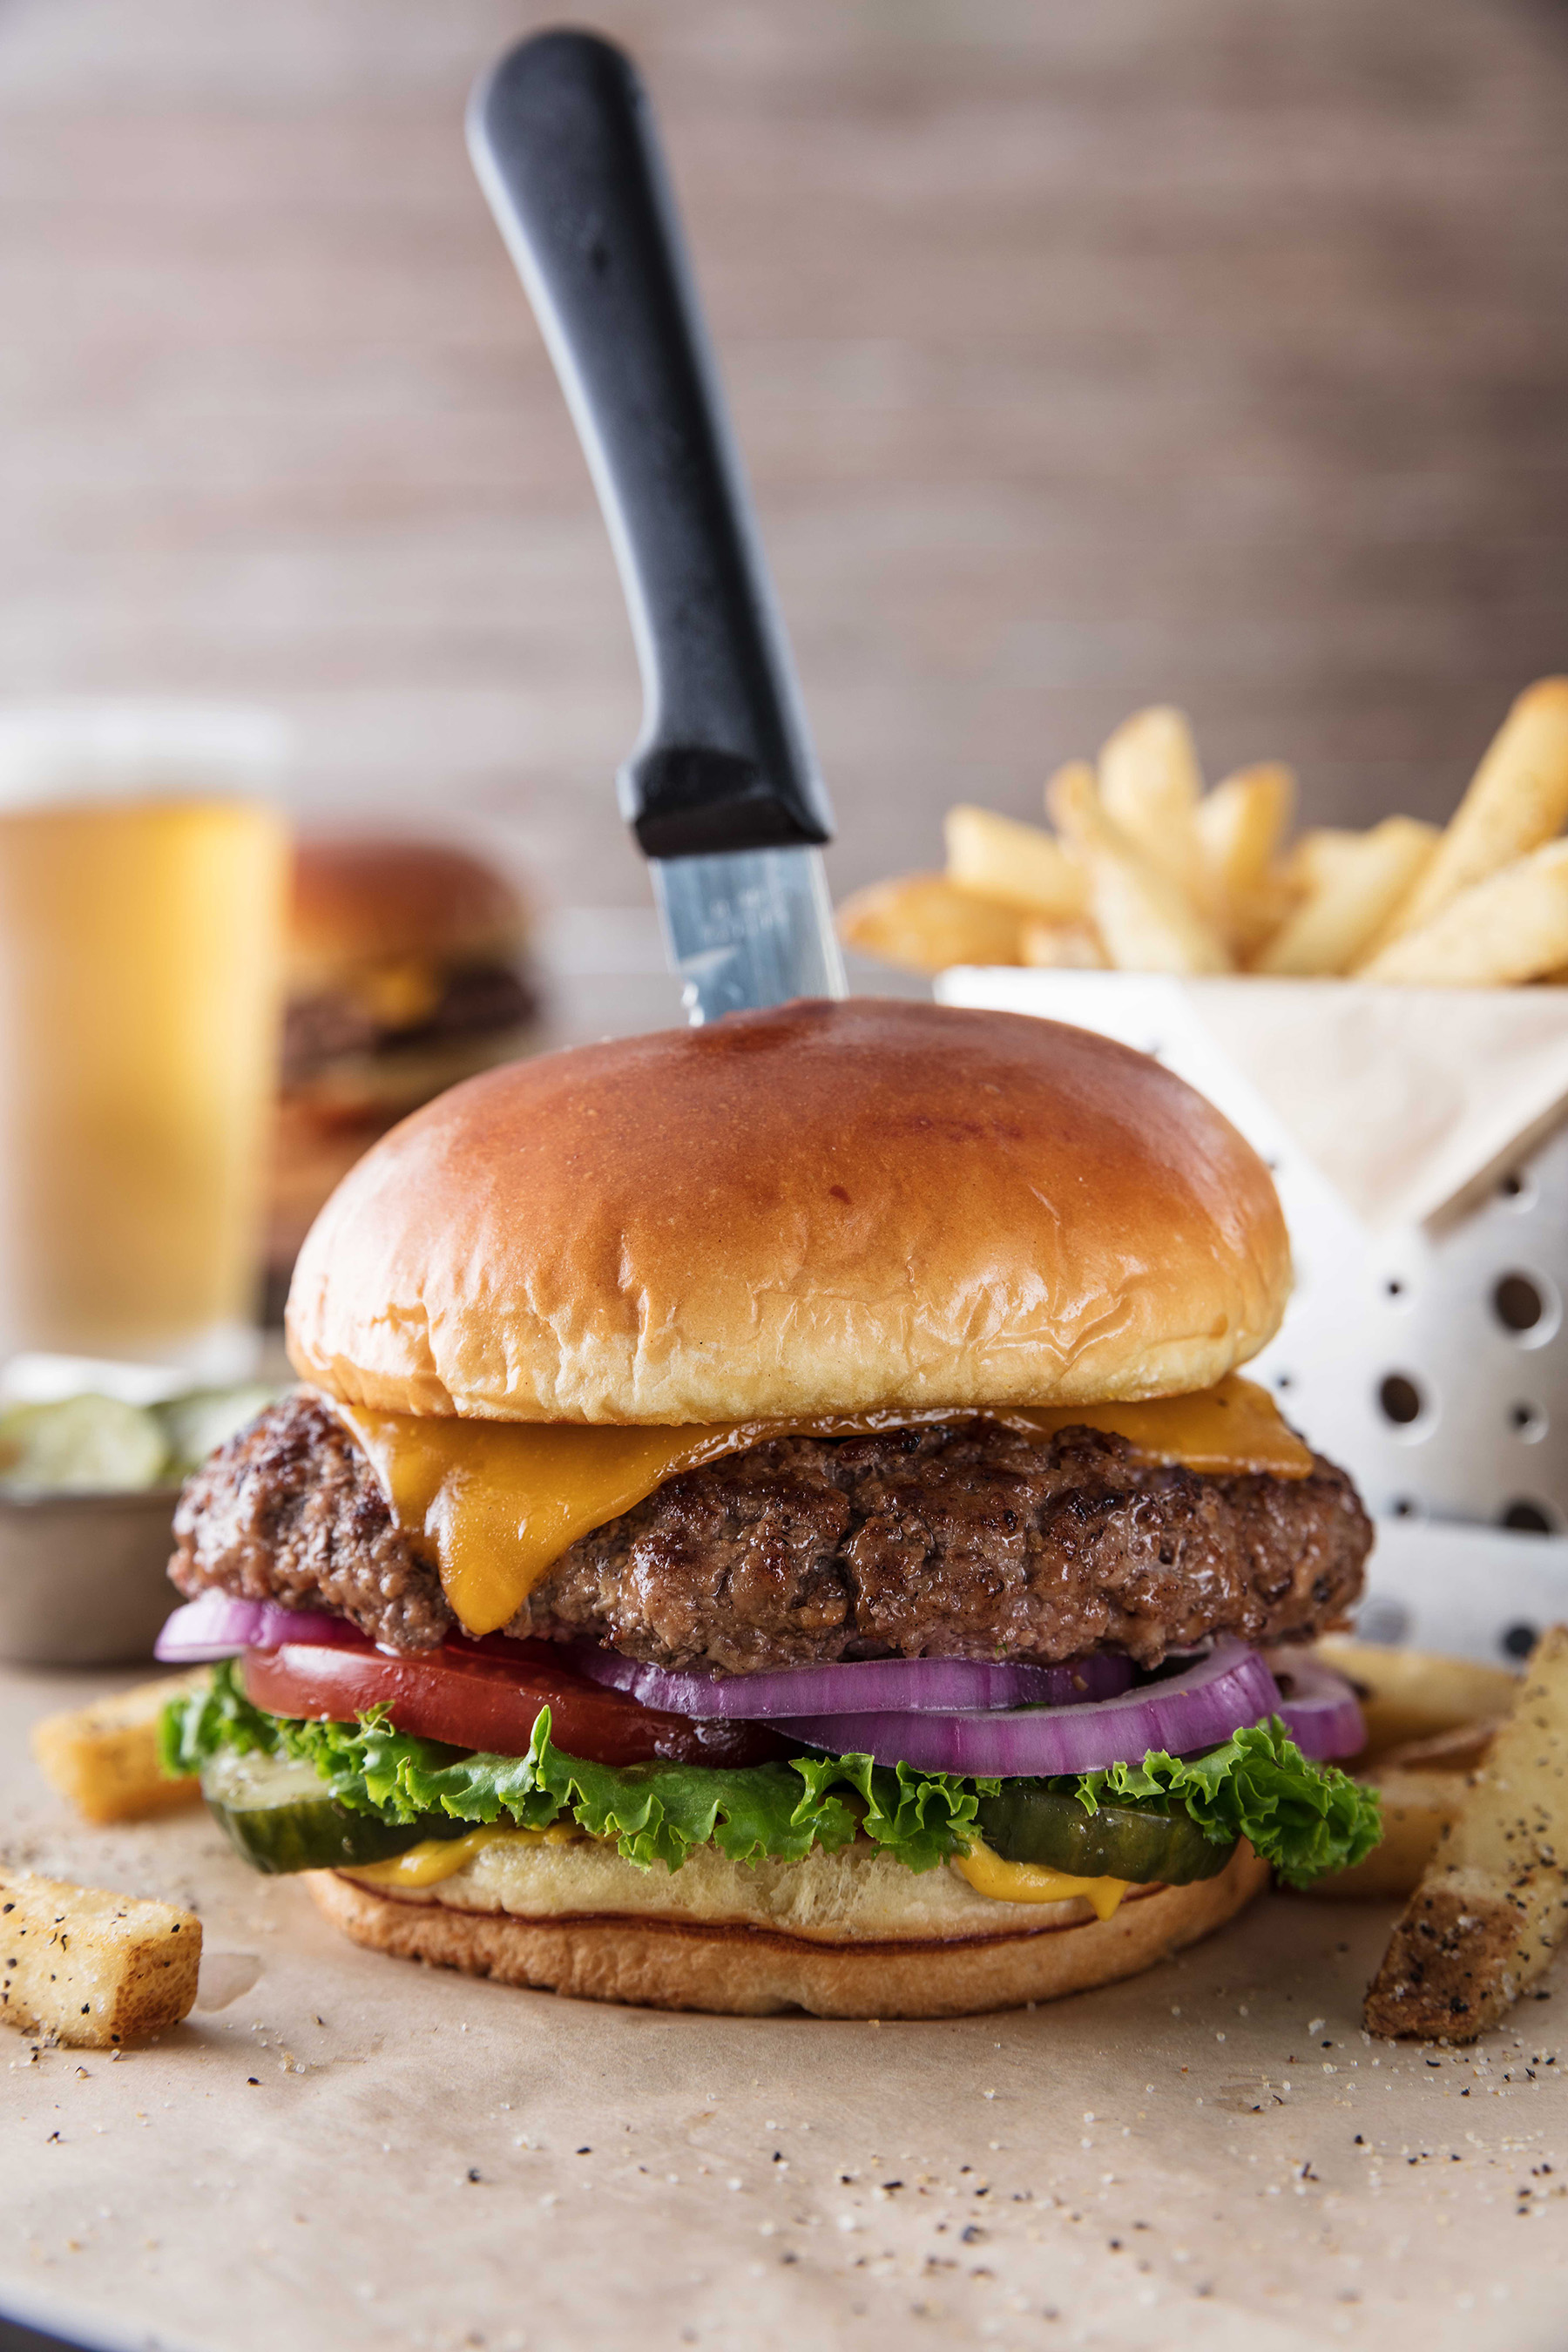 Celebrate Chili's partnership with DoorDash and get your hands on a FREE Oldtimer with Cheese with a $0 delivery fee on orders of $10+. Just use code OLDTIMER at checkout. Terms: https://drd.sh/uVjmPH/